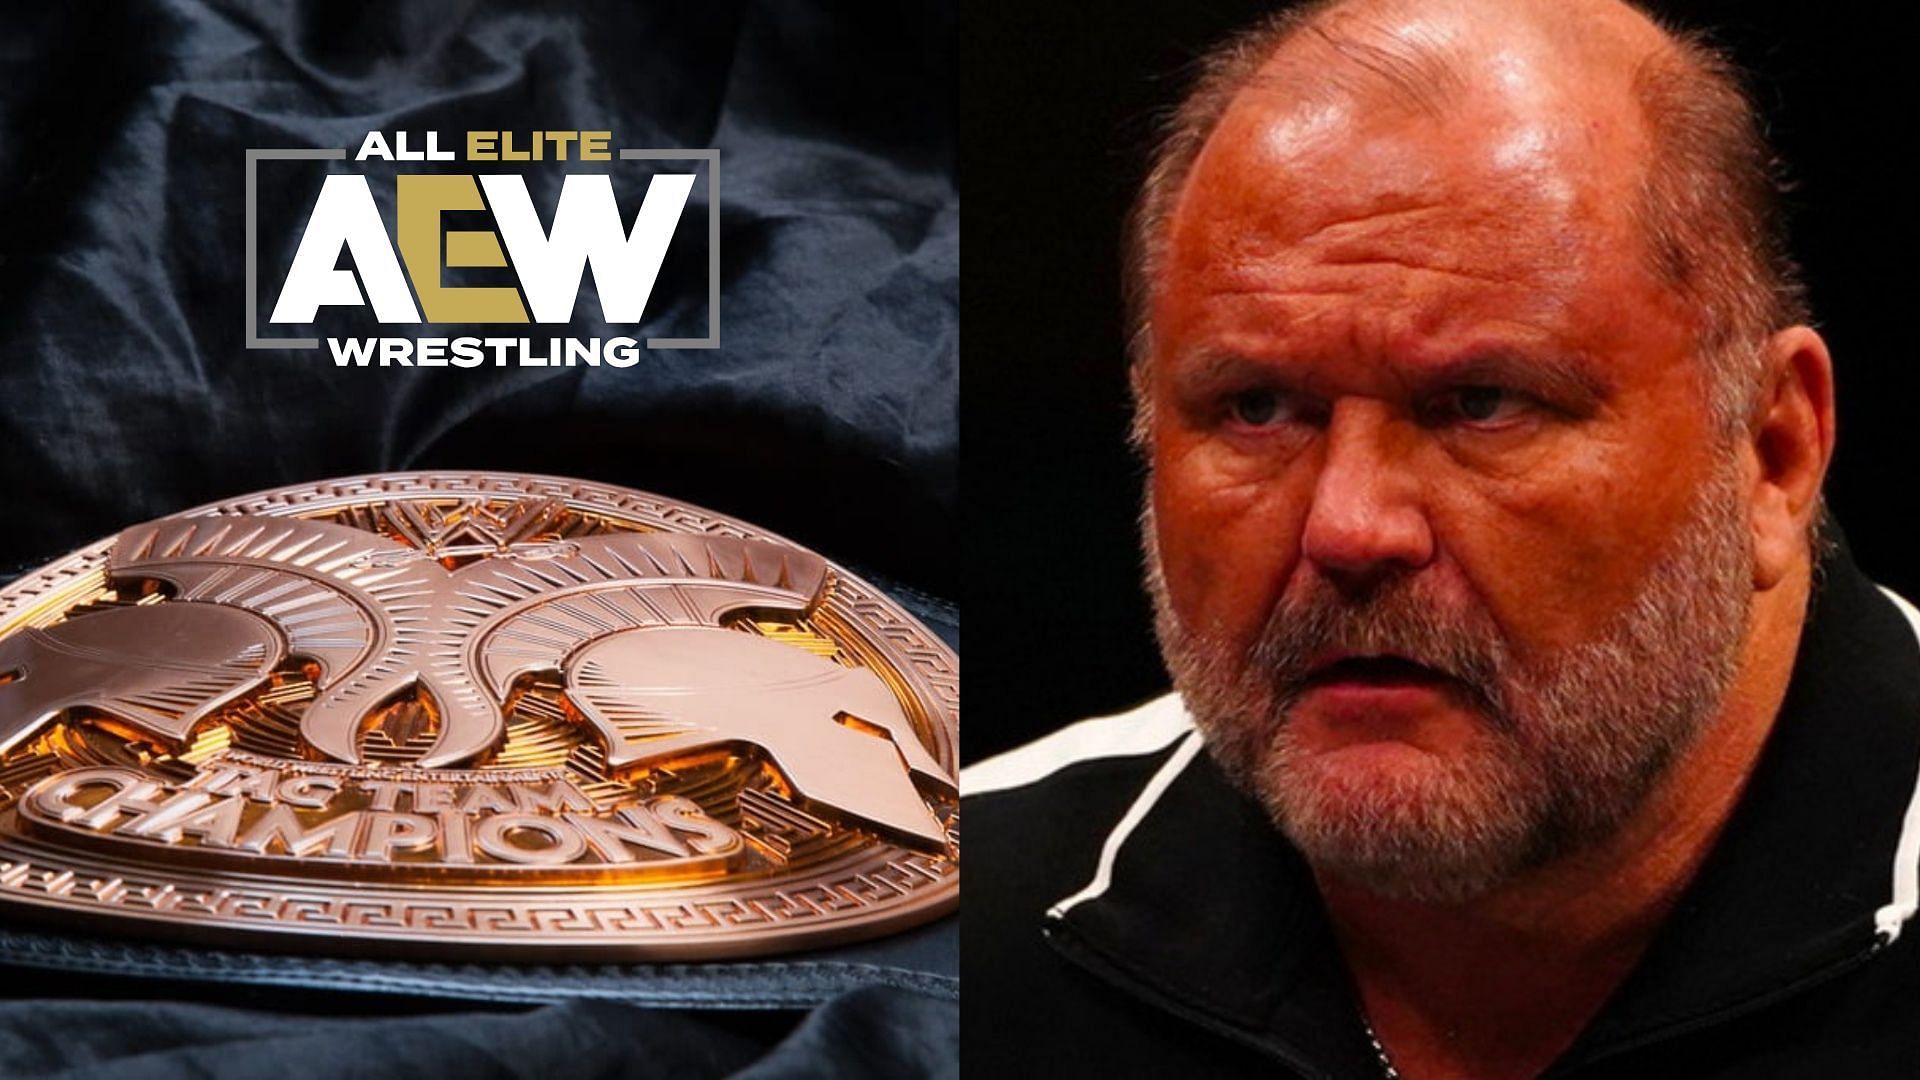 Arn Anderson might be forming a faction with some former WWE Tag Team Champions